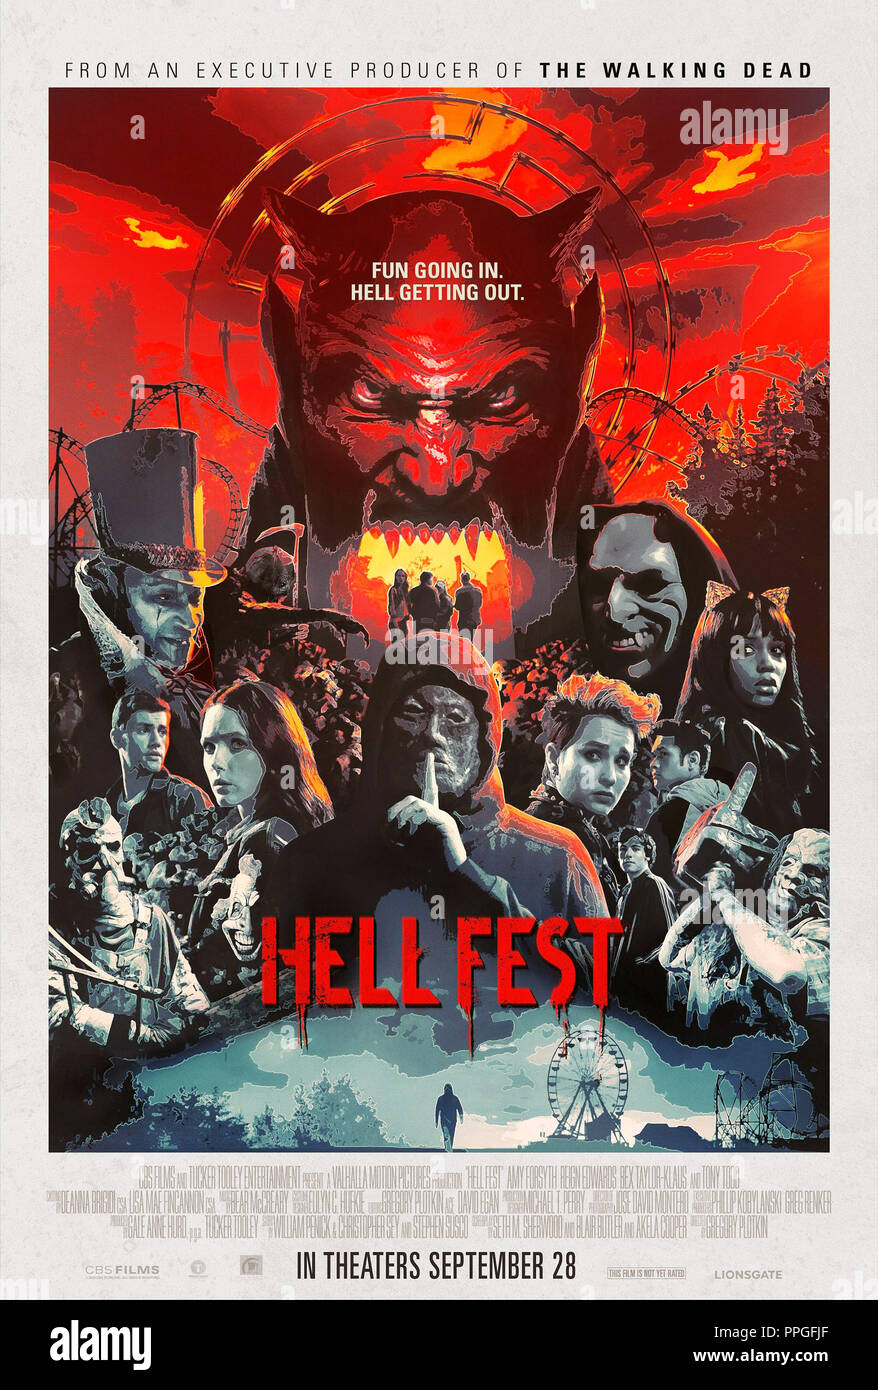 HELL FEST, US advance poster, Tony Todd (top left), Christian